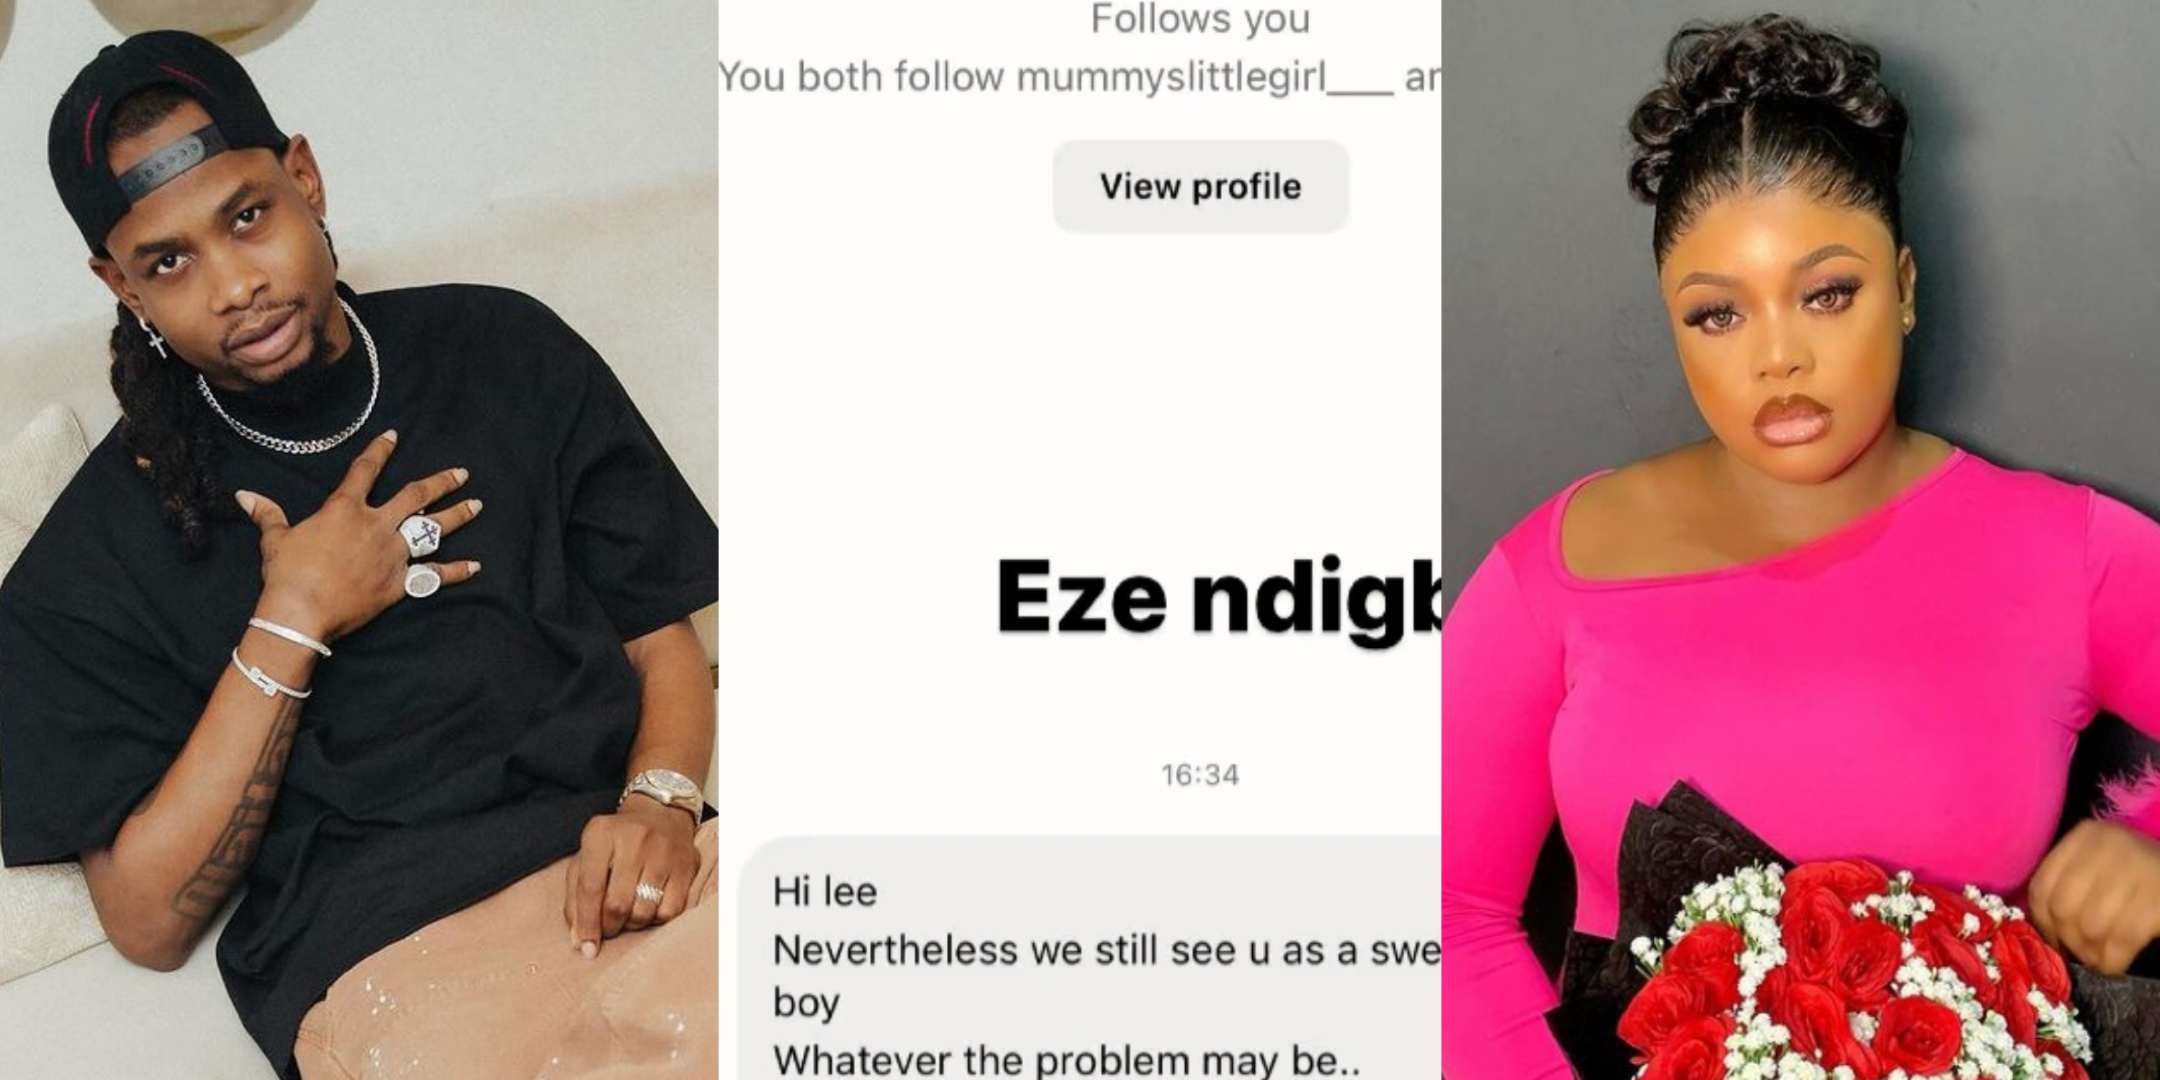 Hours after breakup, lady slides into Yhemolee's DM to ask him to consider dating from her tribe